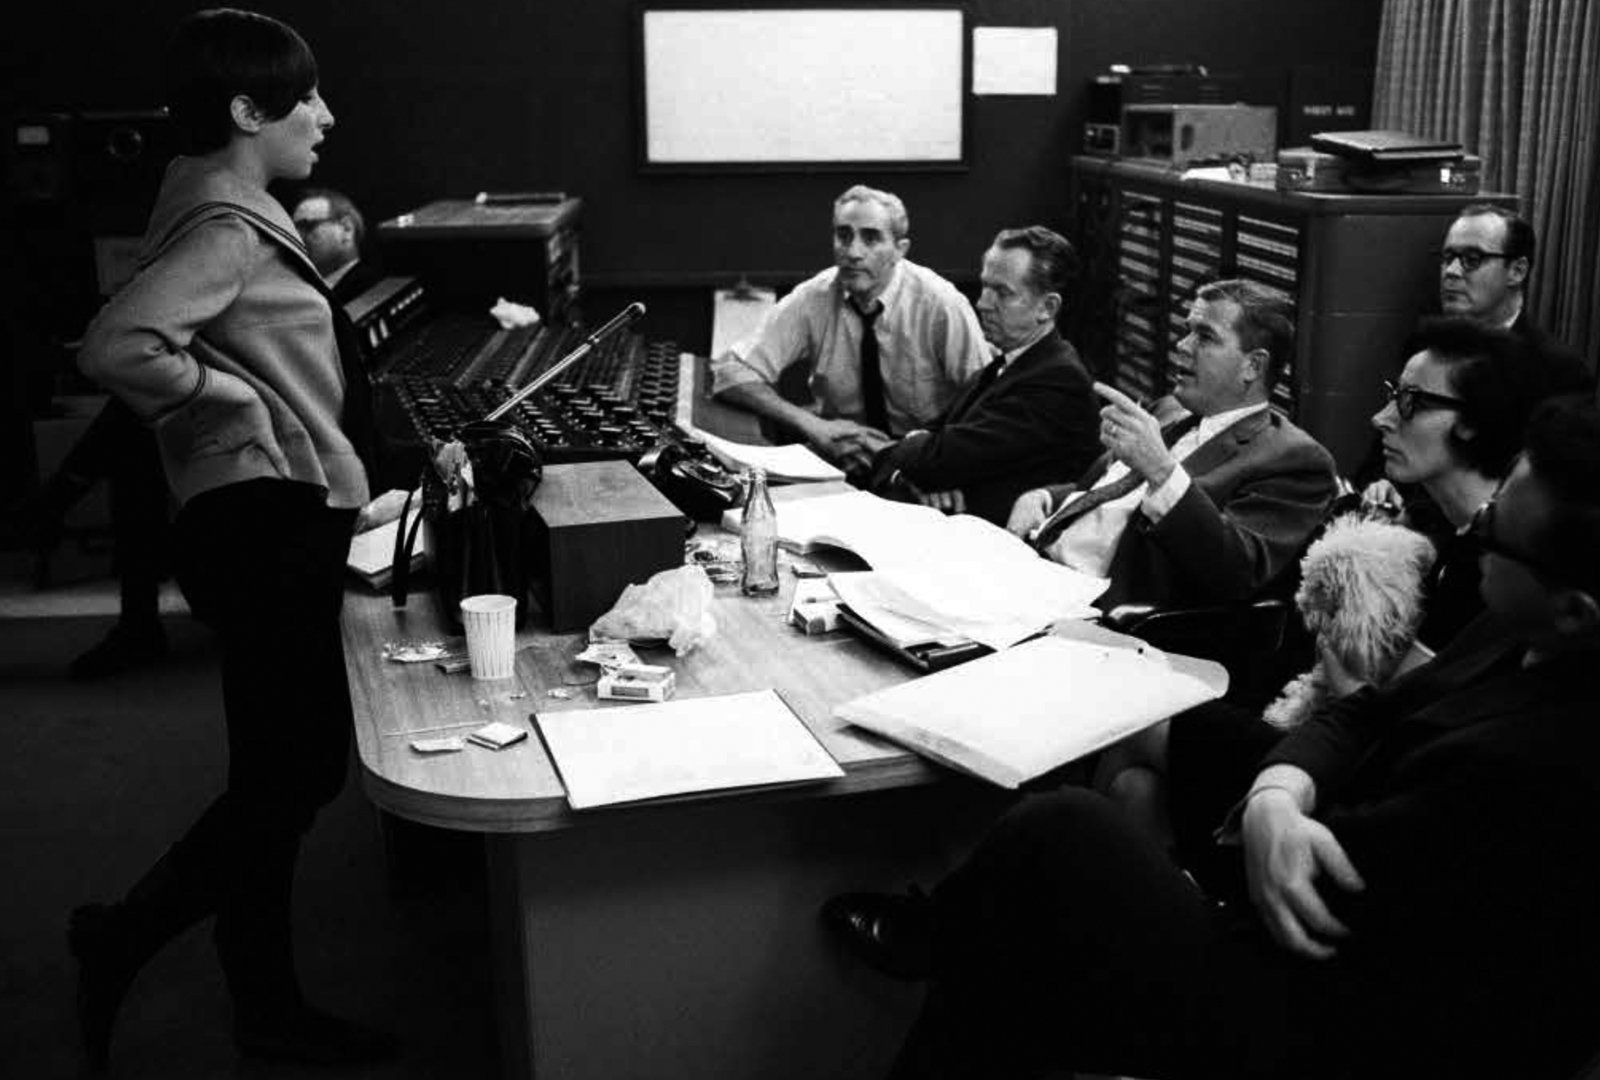 Streisand in the recording booth with creative and technical crew.  Photo by Bill Eppridge.